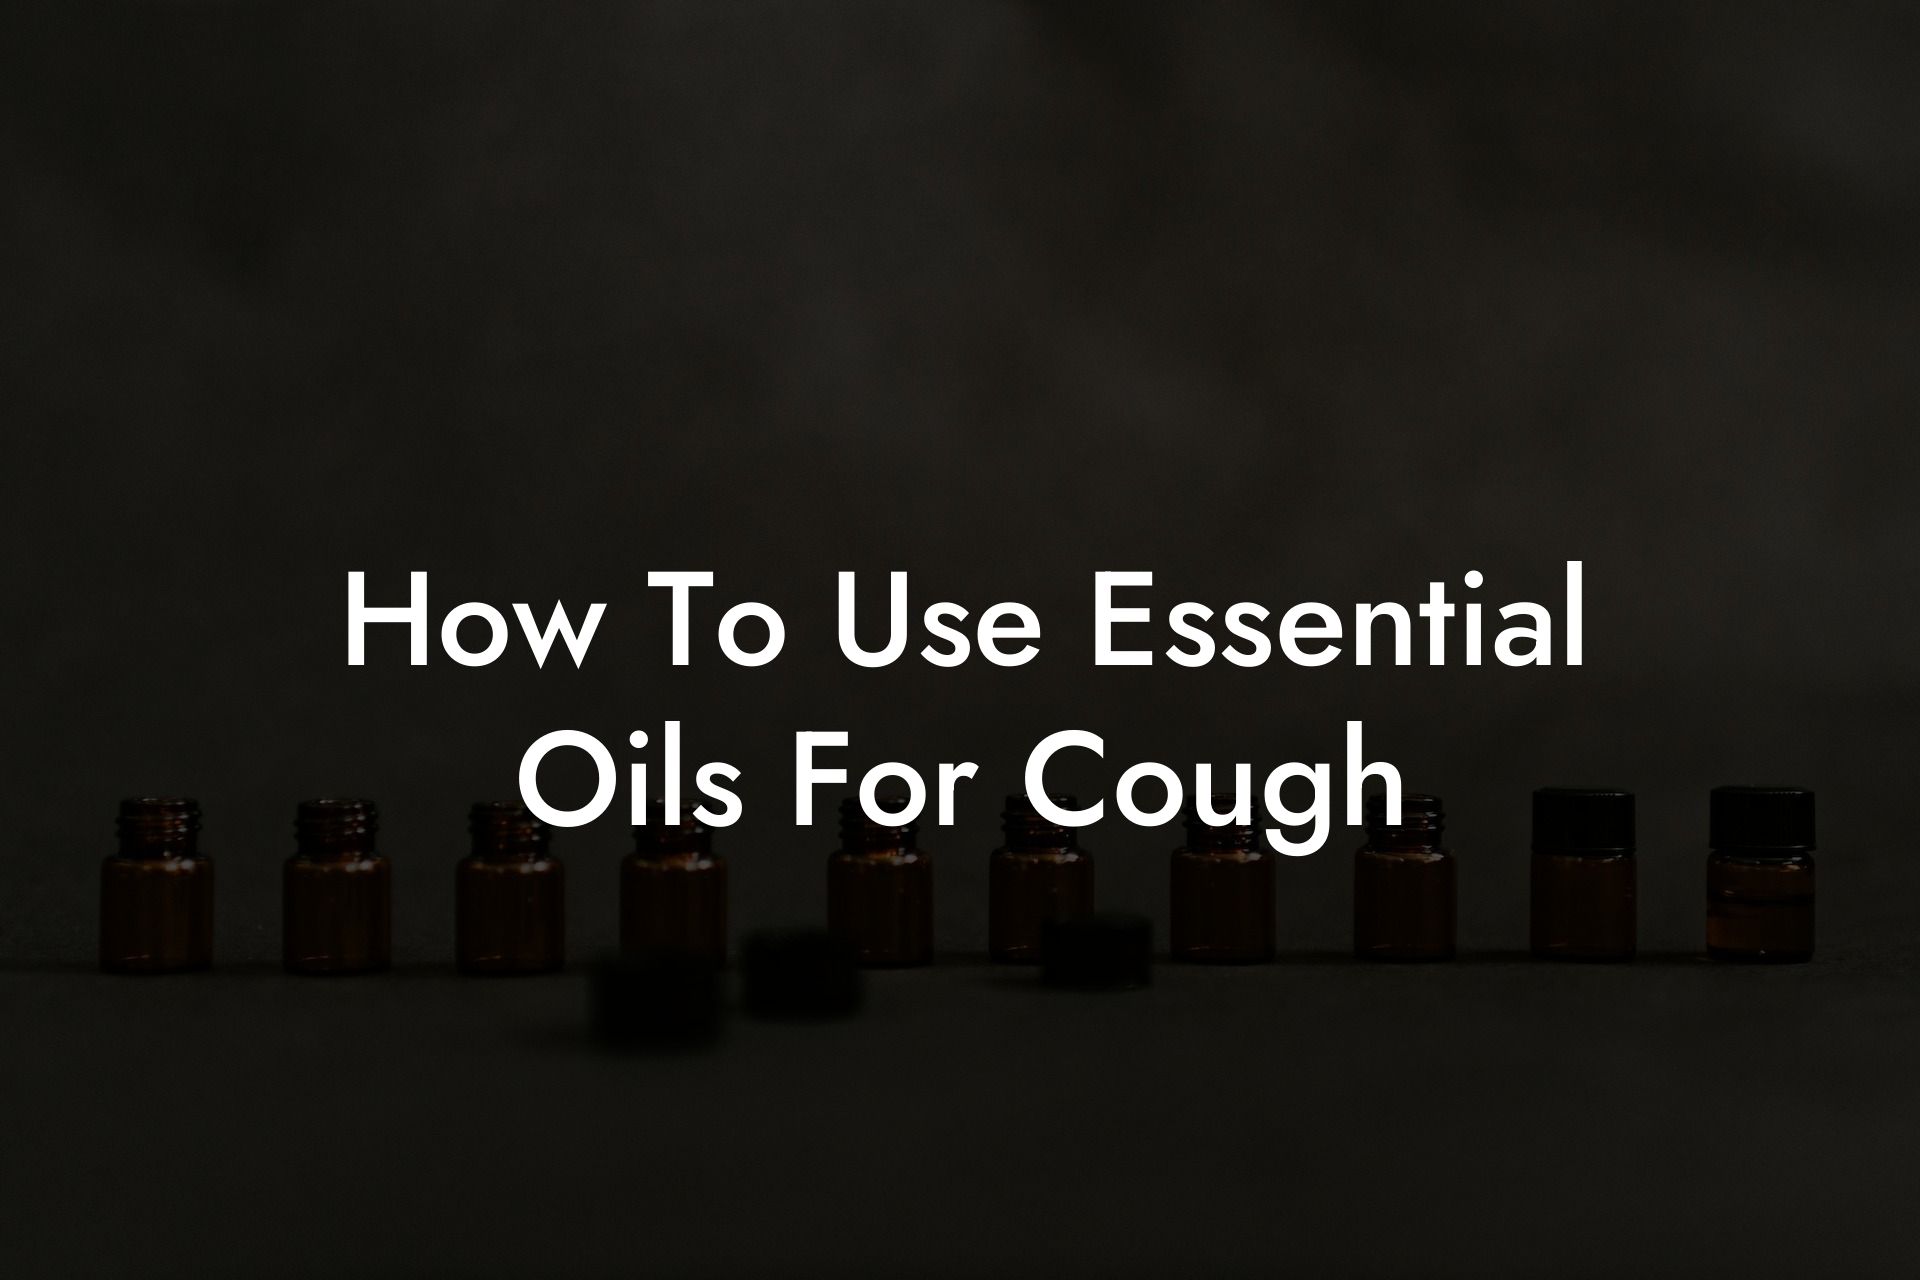 How To Use Essential Oils For Cough